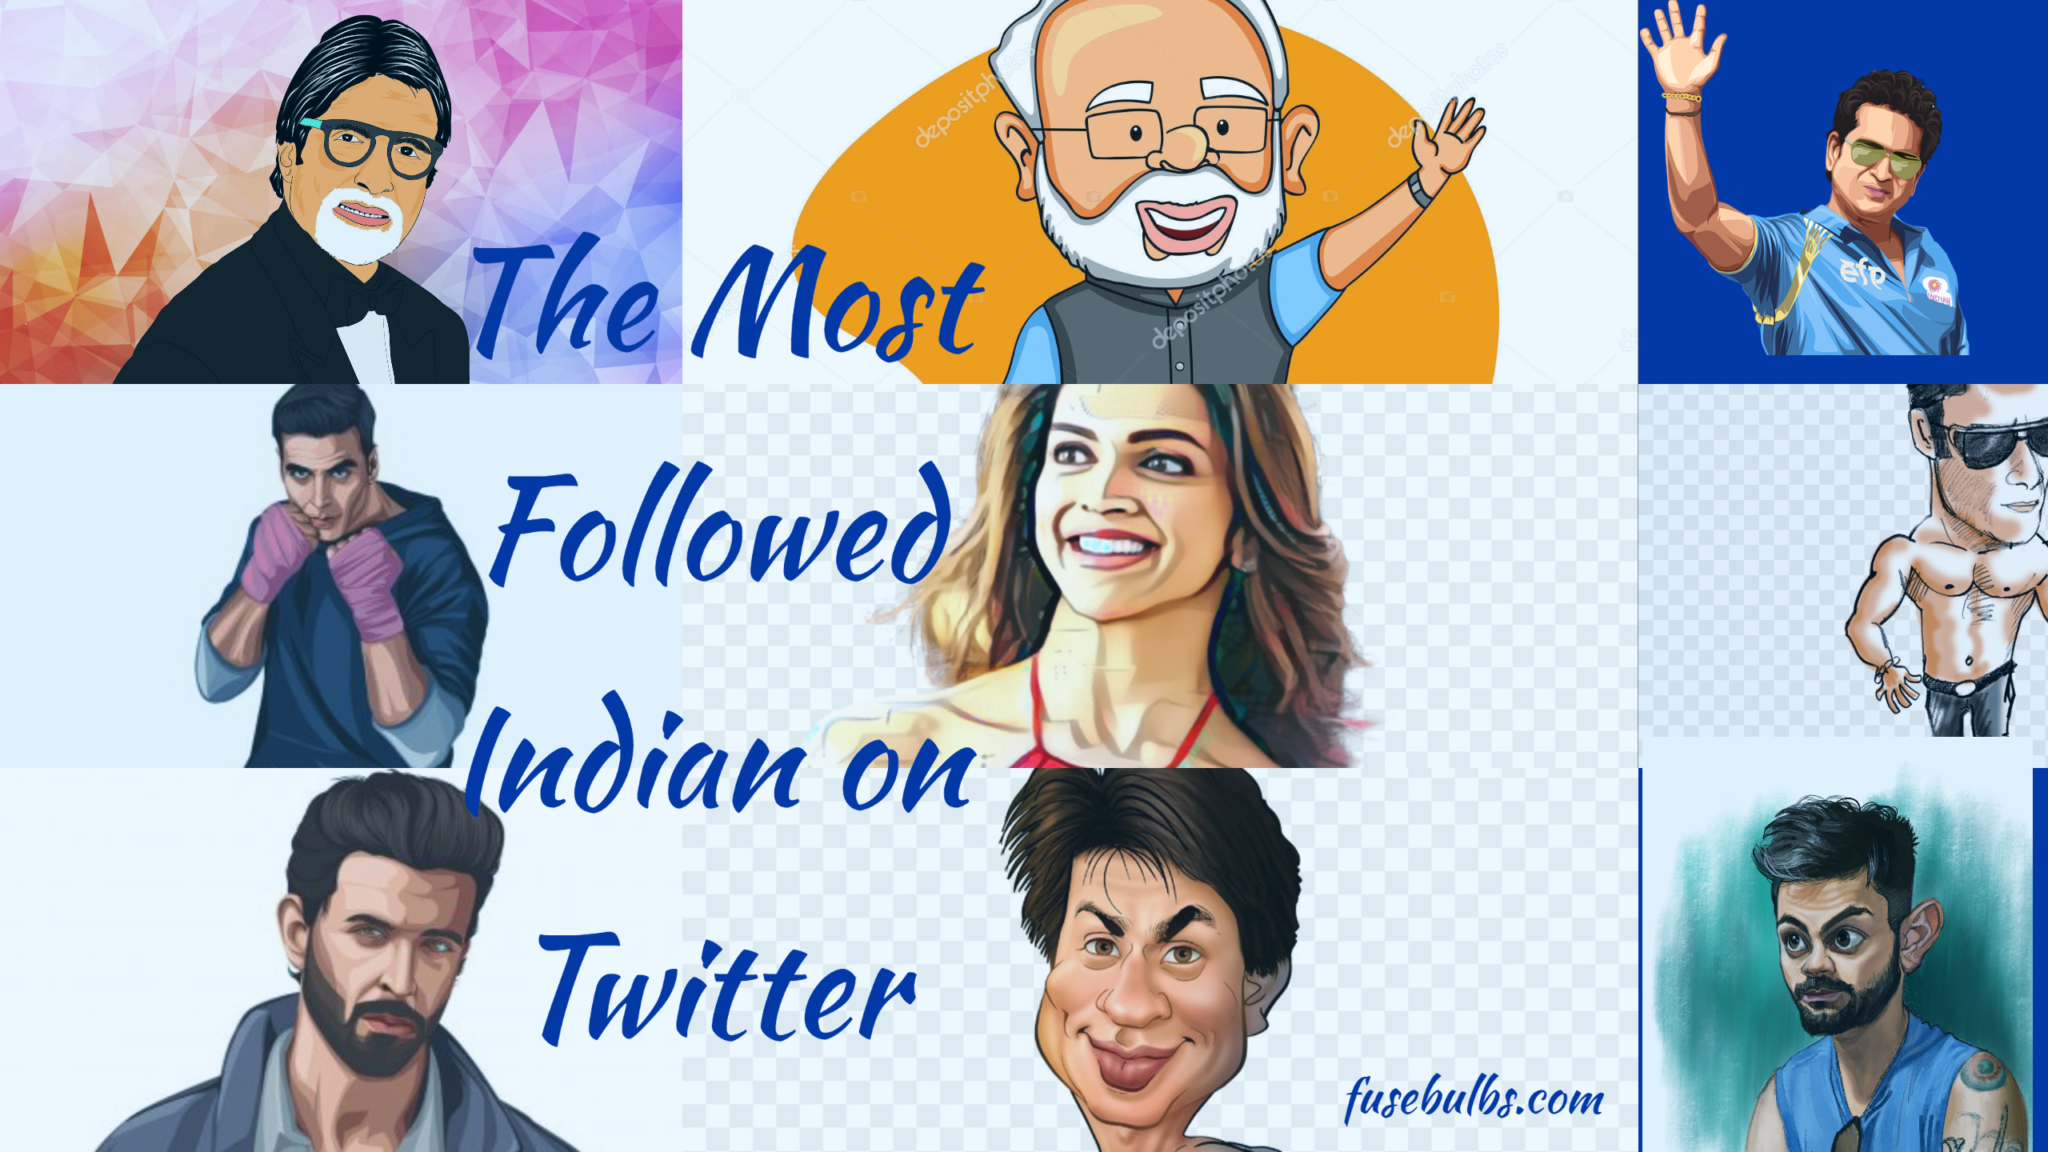 Who are the mostfollowed Indians on Twitter is it Salman or Shahrukh?